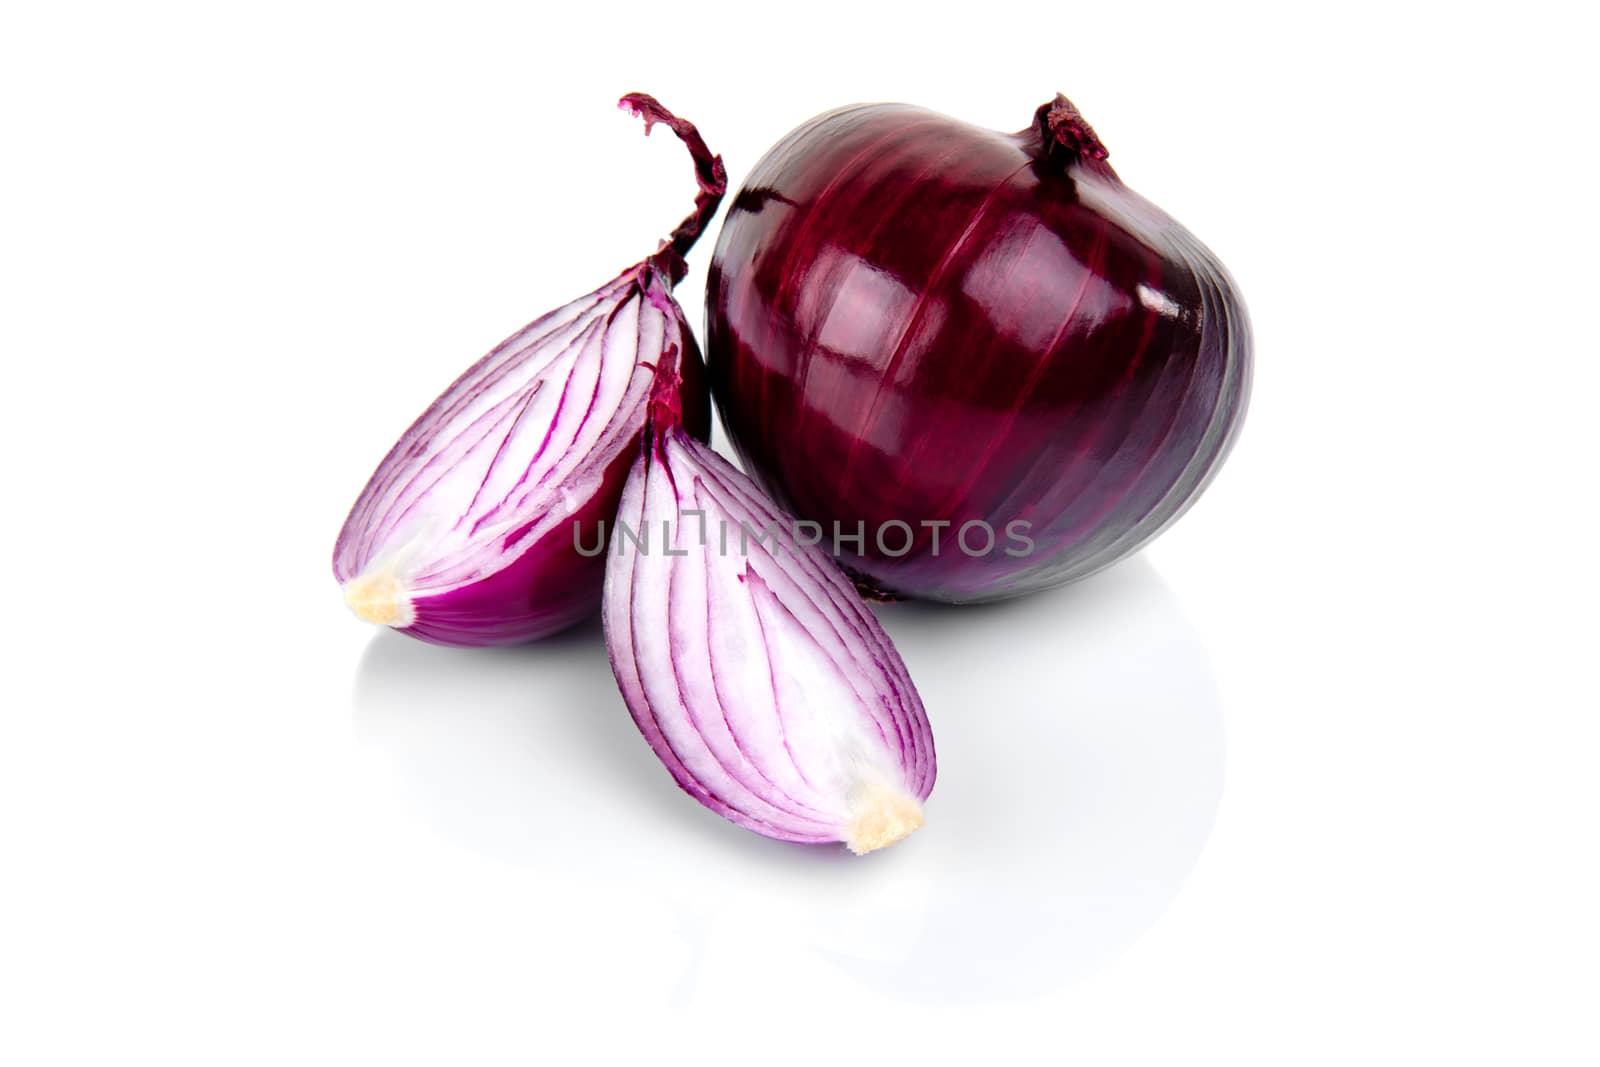 Red onion and half slice on white background with reflect. by leonik